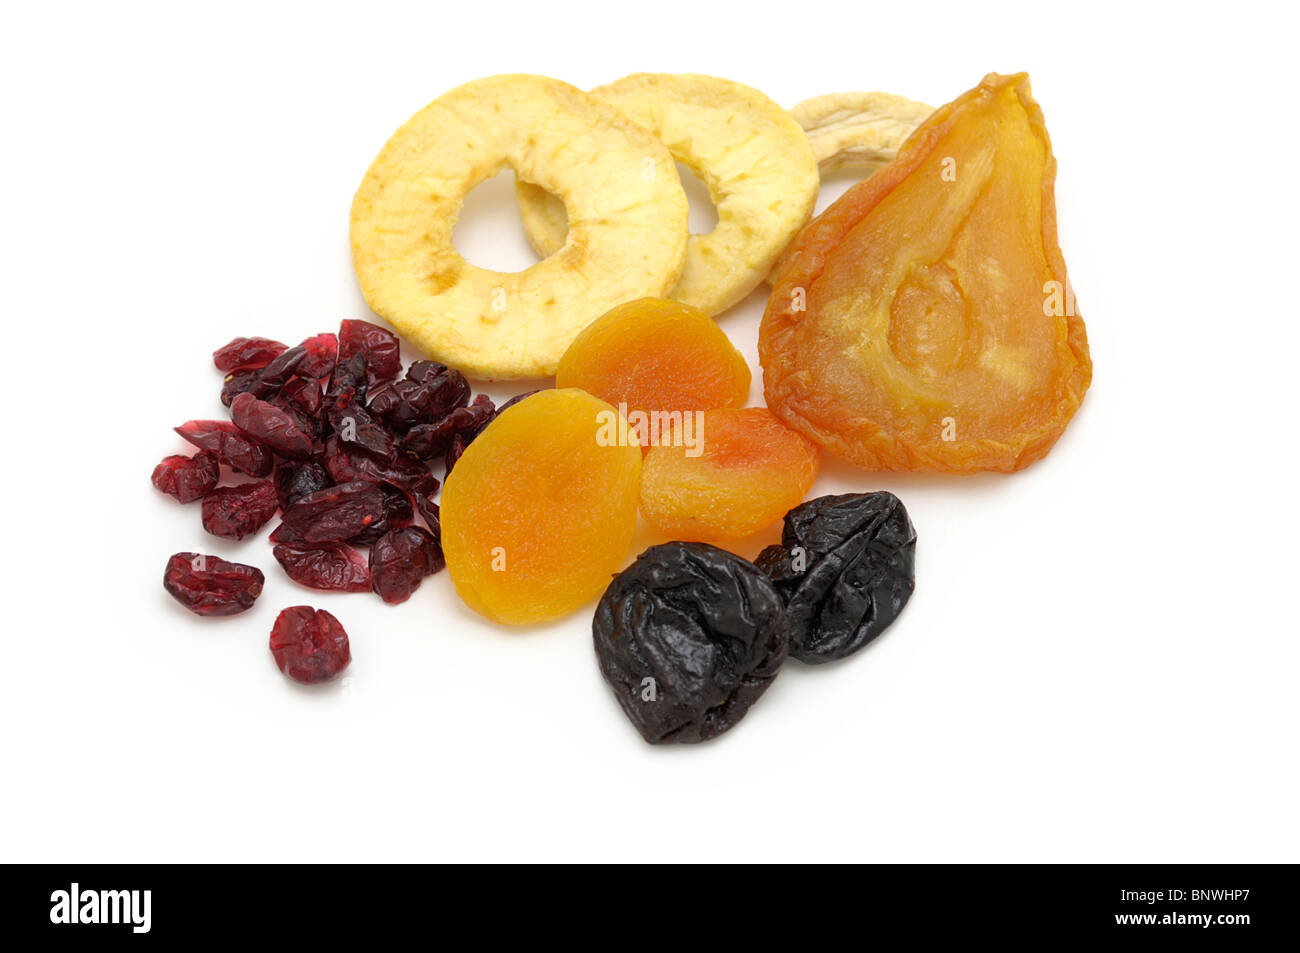 Dried Fruits (Pears, Apple Rings, Cranberries, Apricots, Prunes) Stock Photo